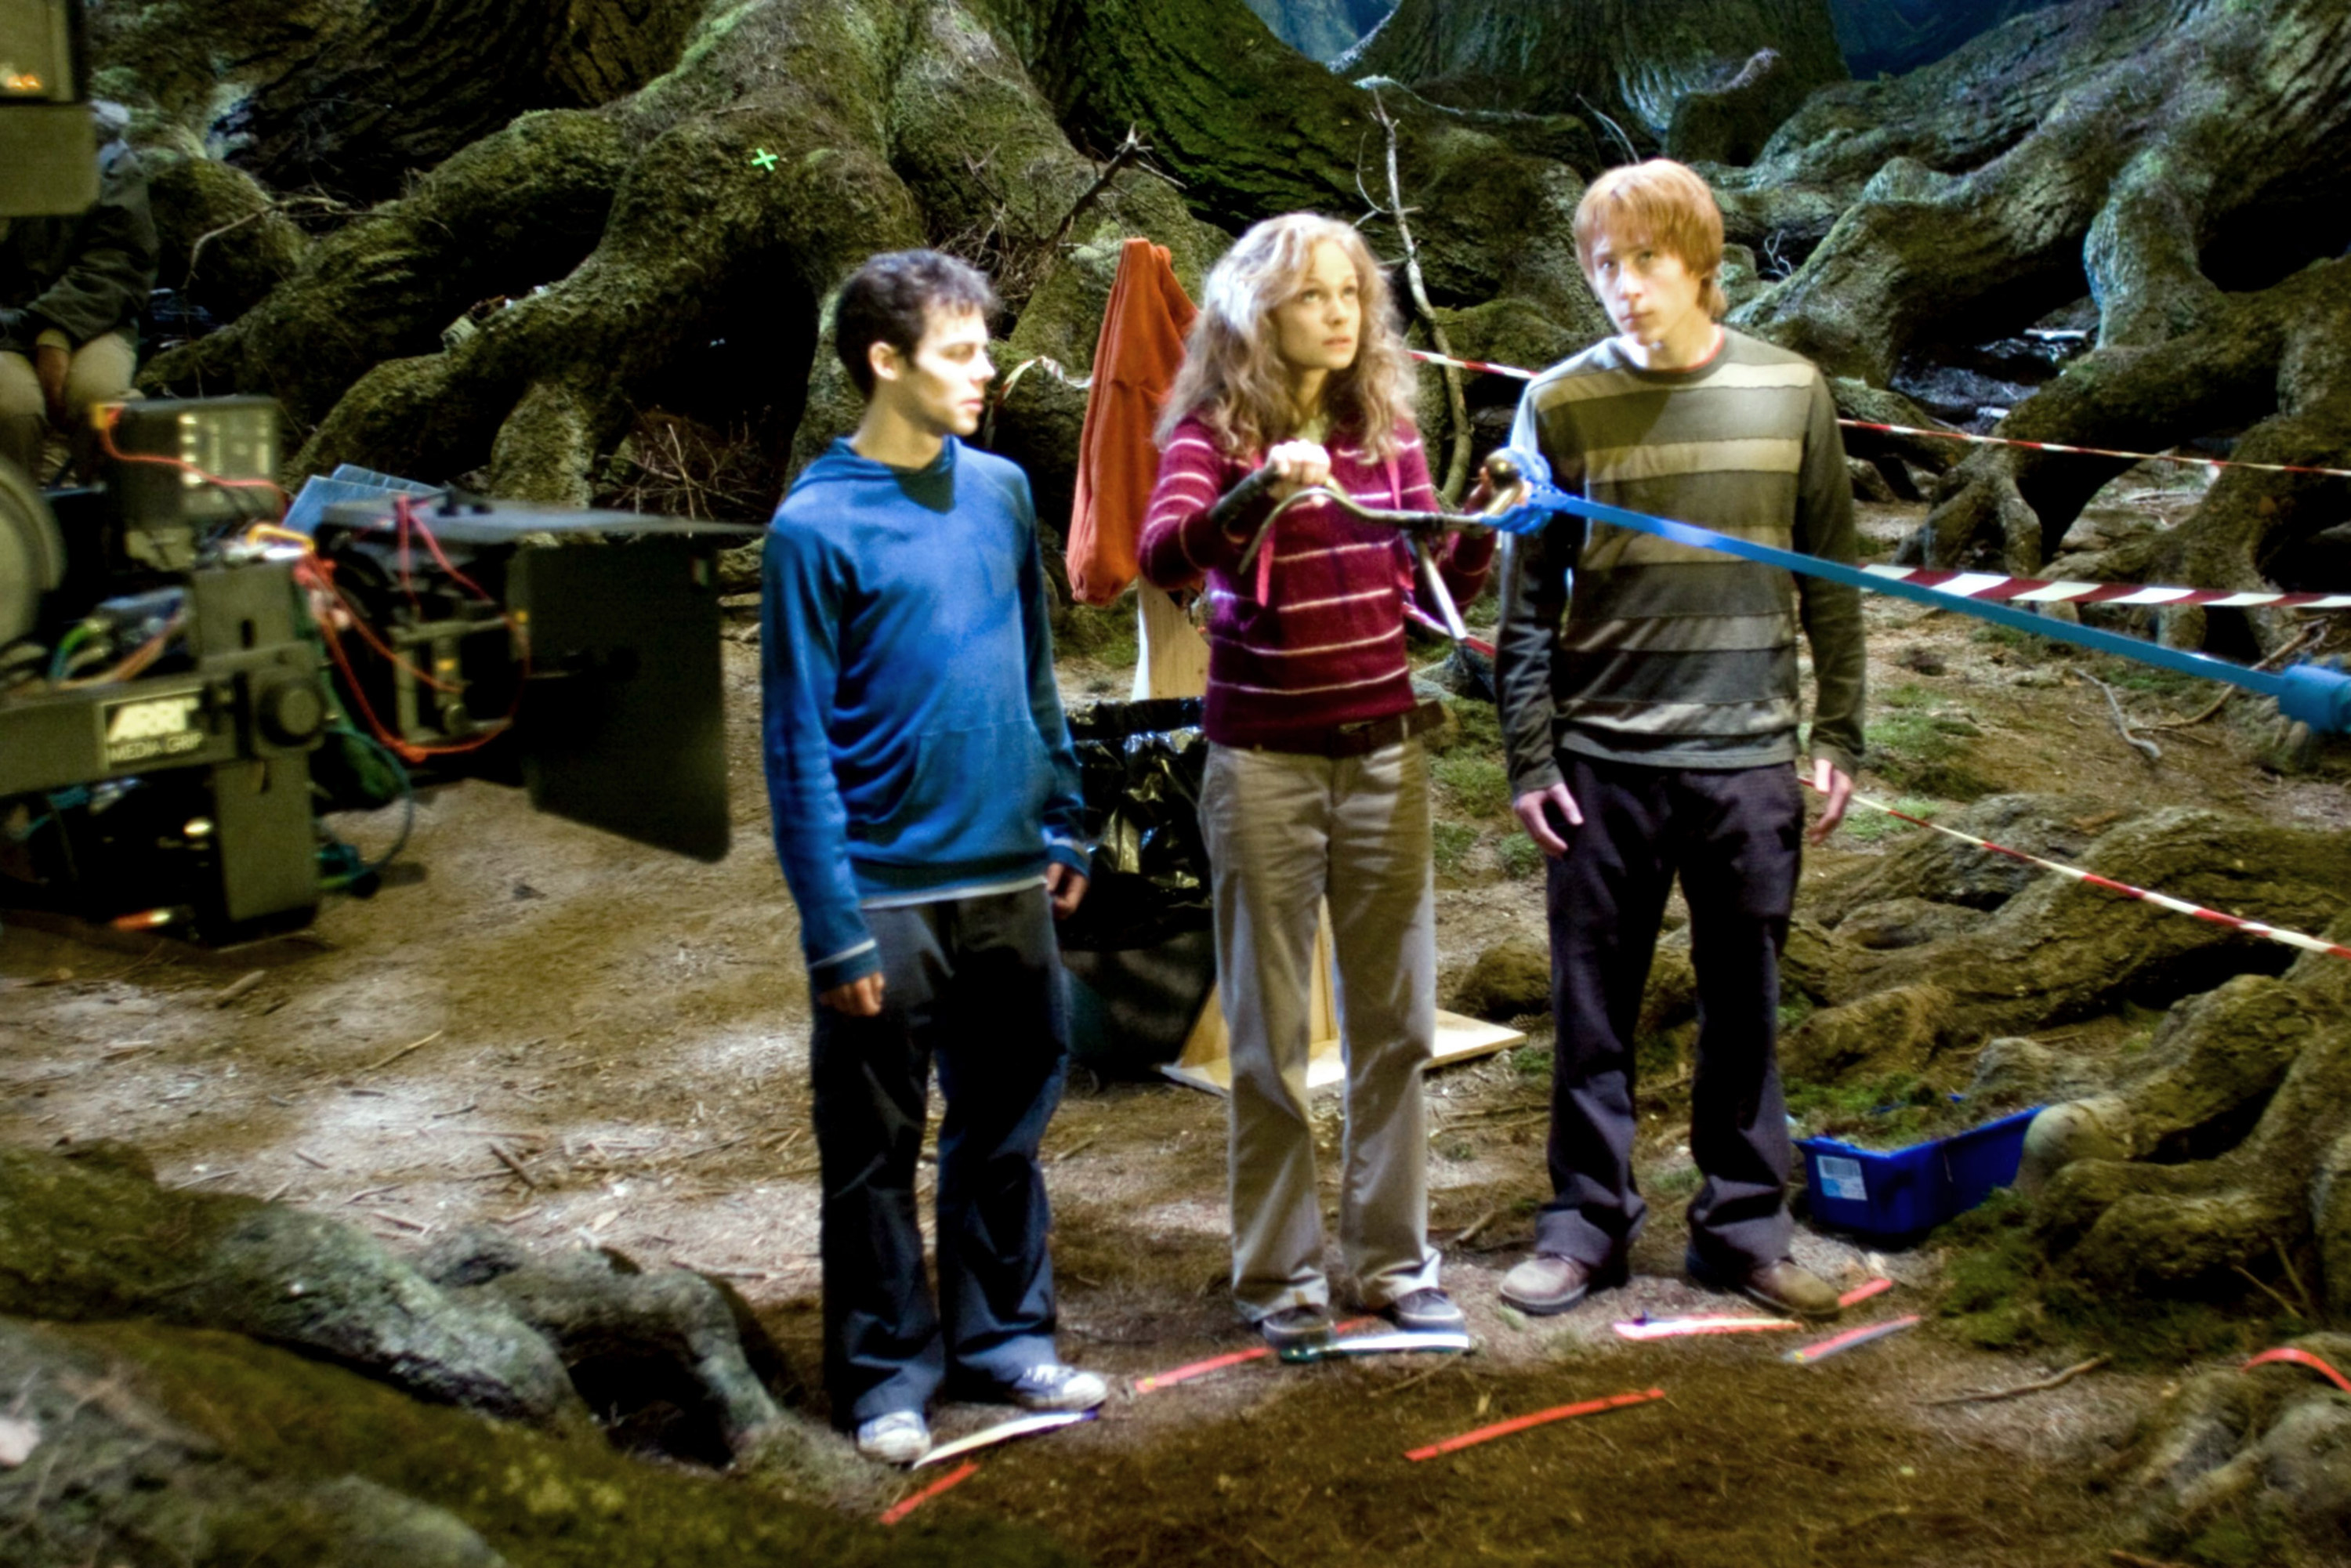 The doubles for Daniel Radcliffe, Rupert Grint, and Emma Watson on set